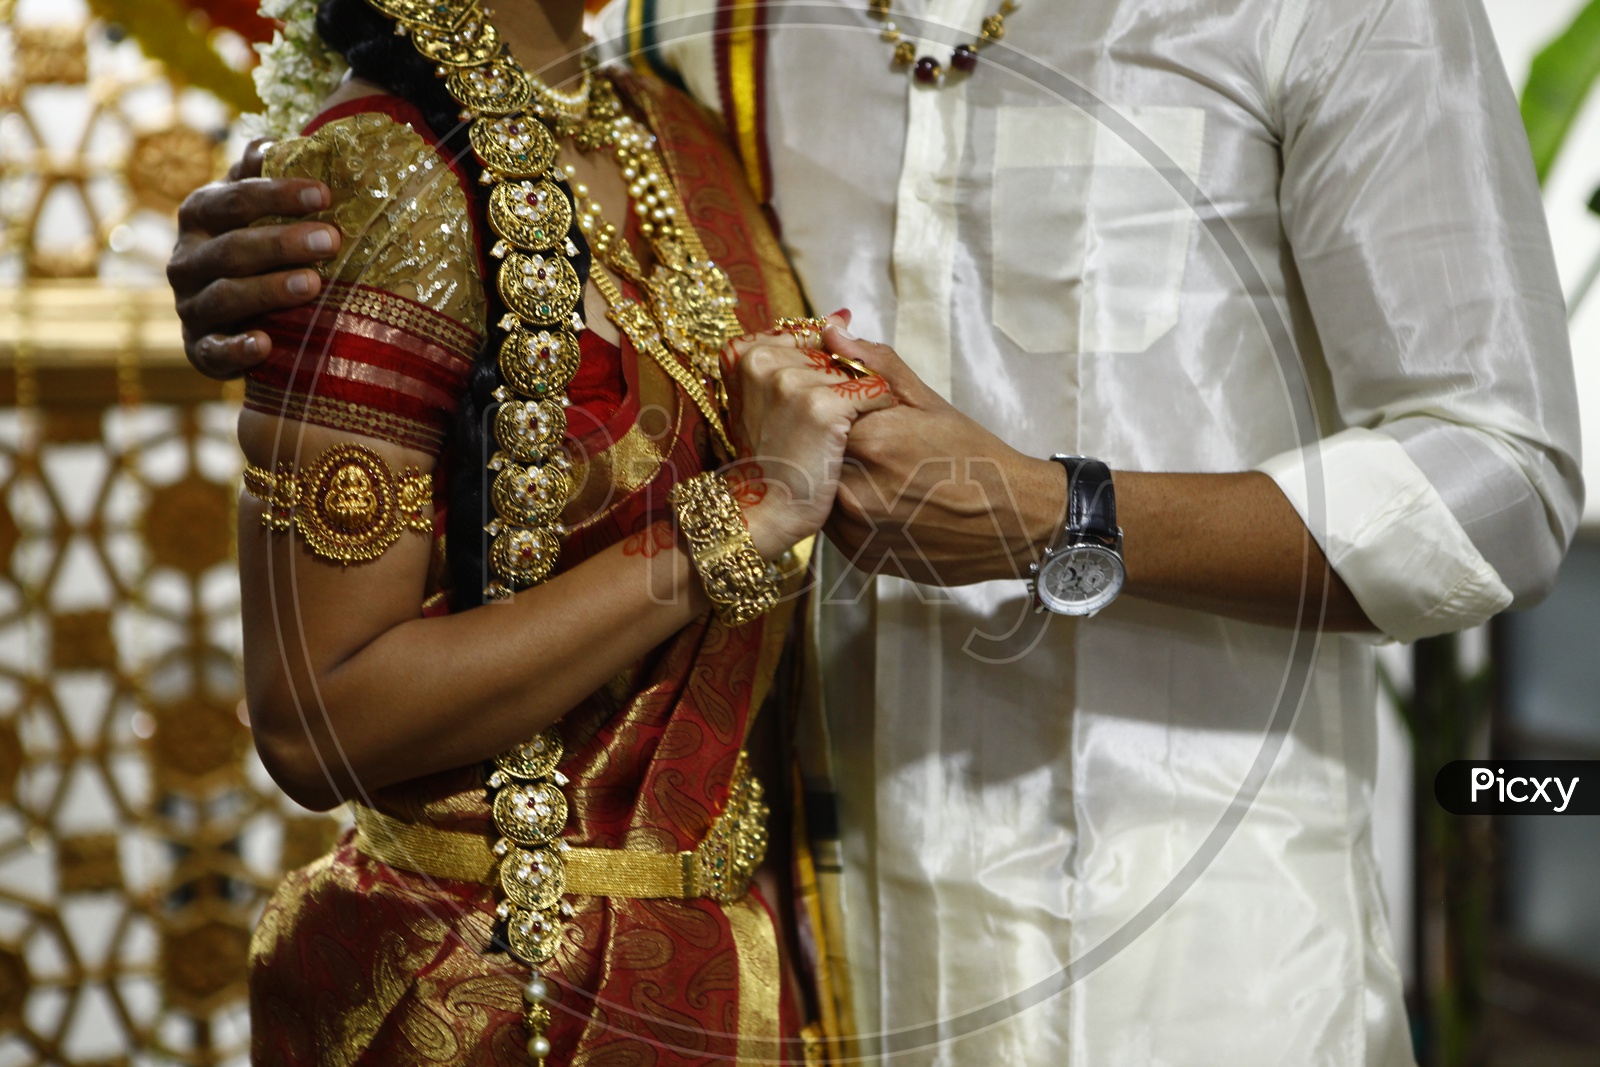 Indian bridegroom and bride holding close to each other